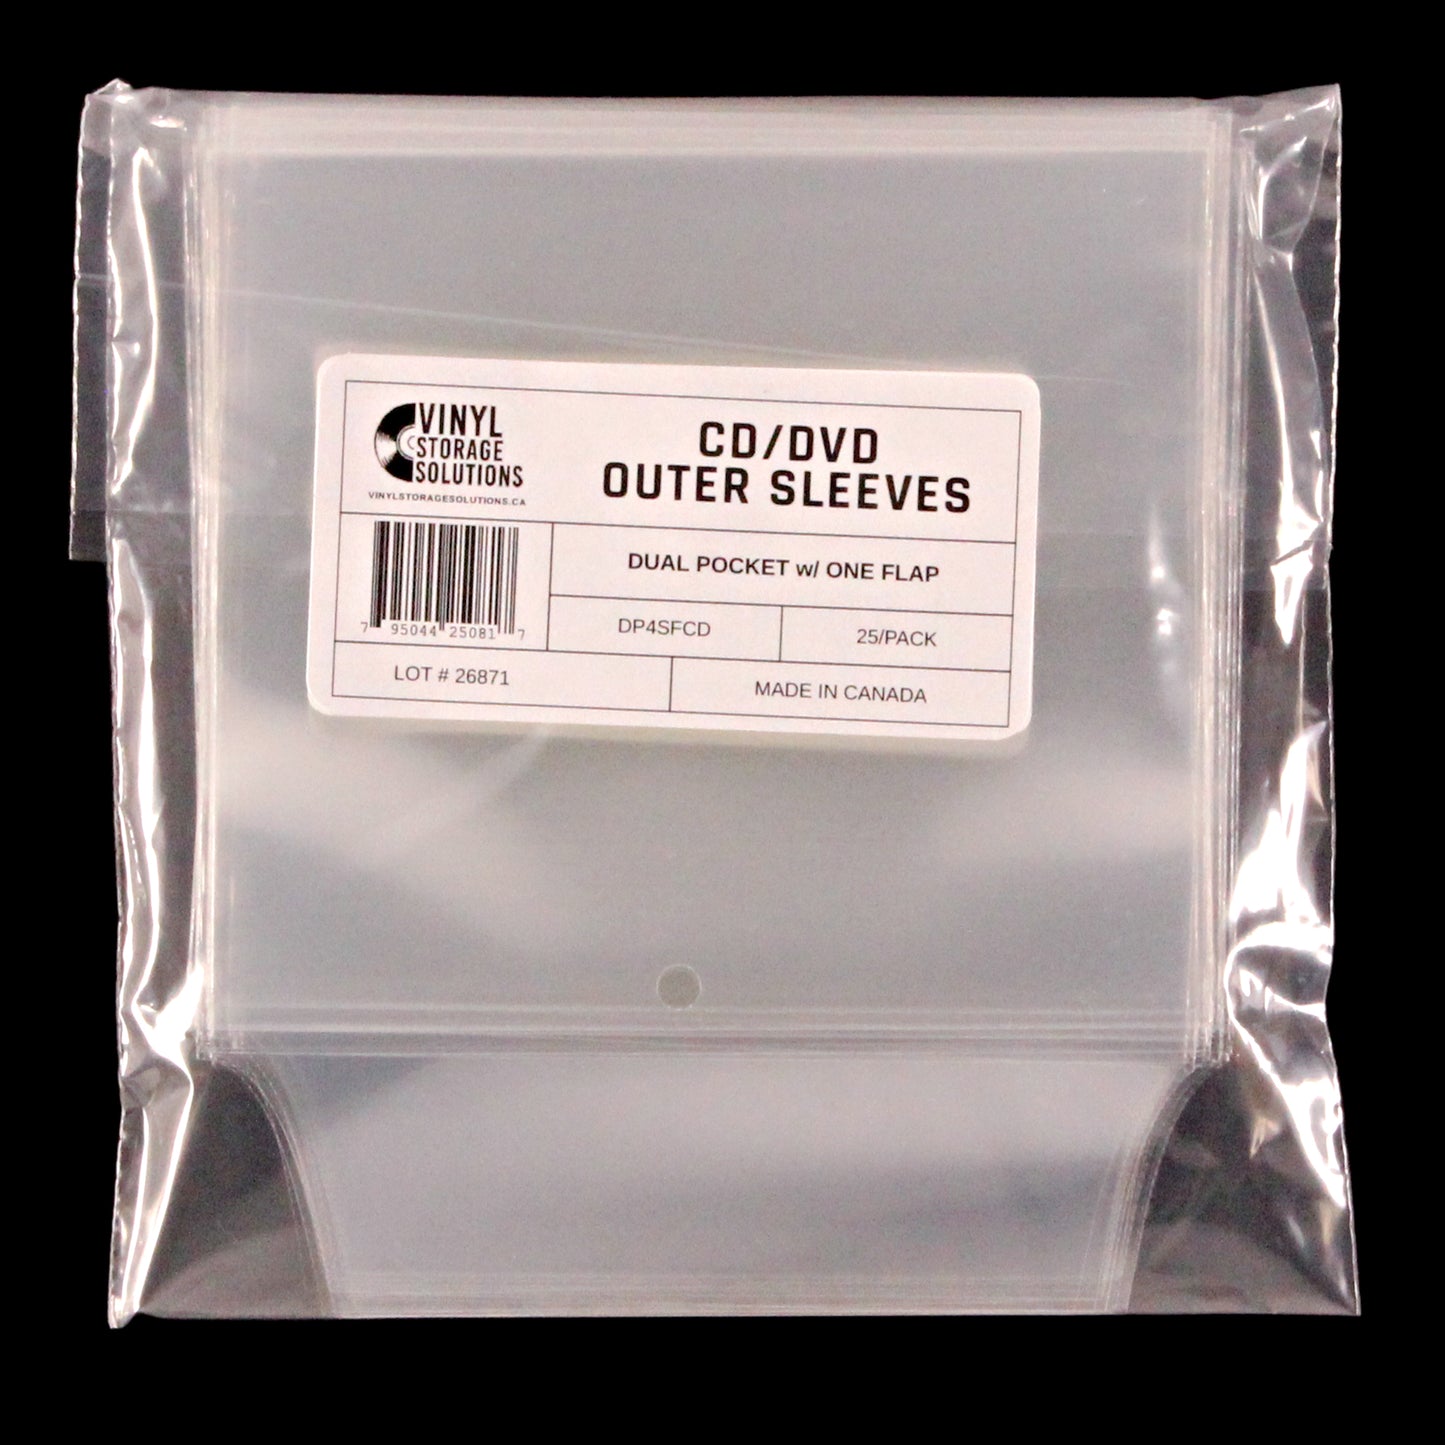 CD/DVD Dual Pocket Outer Sleeves w/ One Flap - 4mil (25 pack)